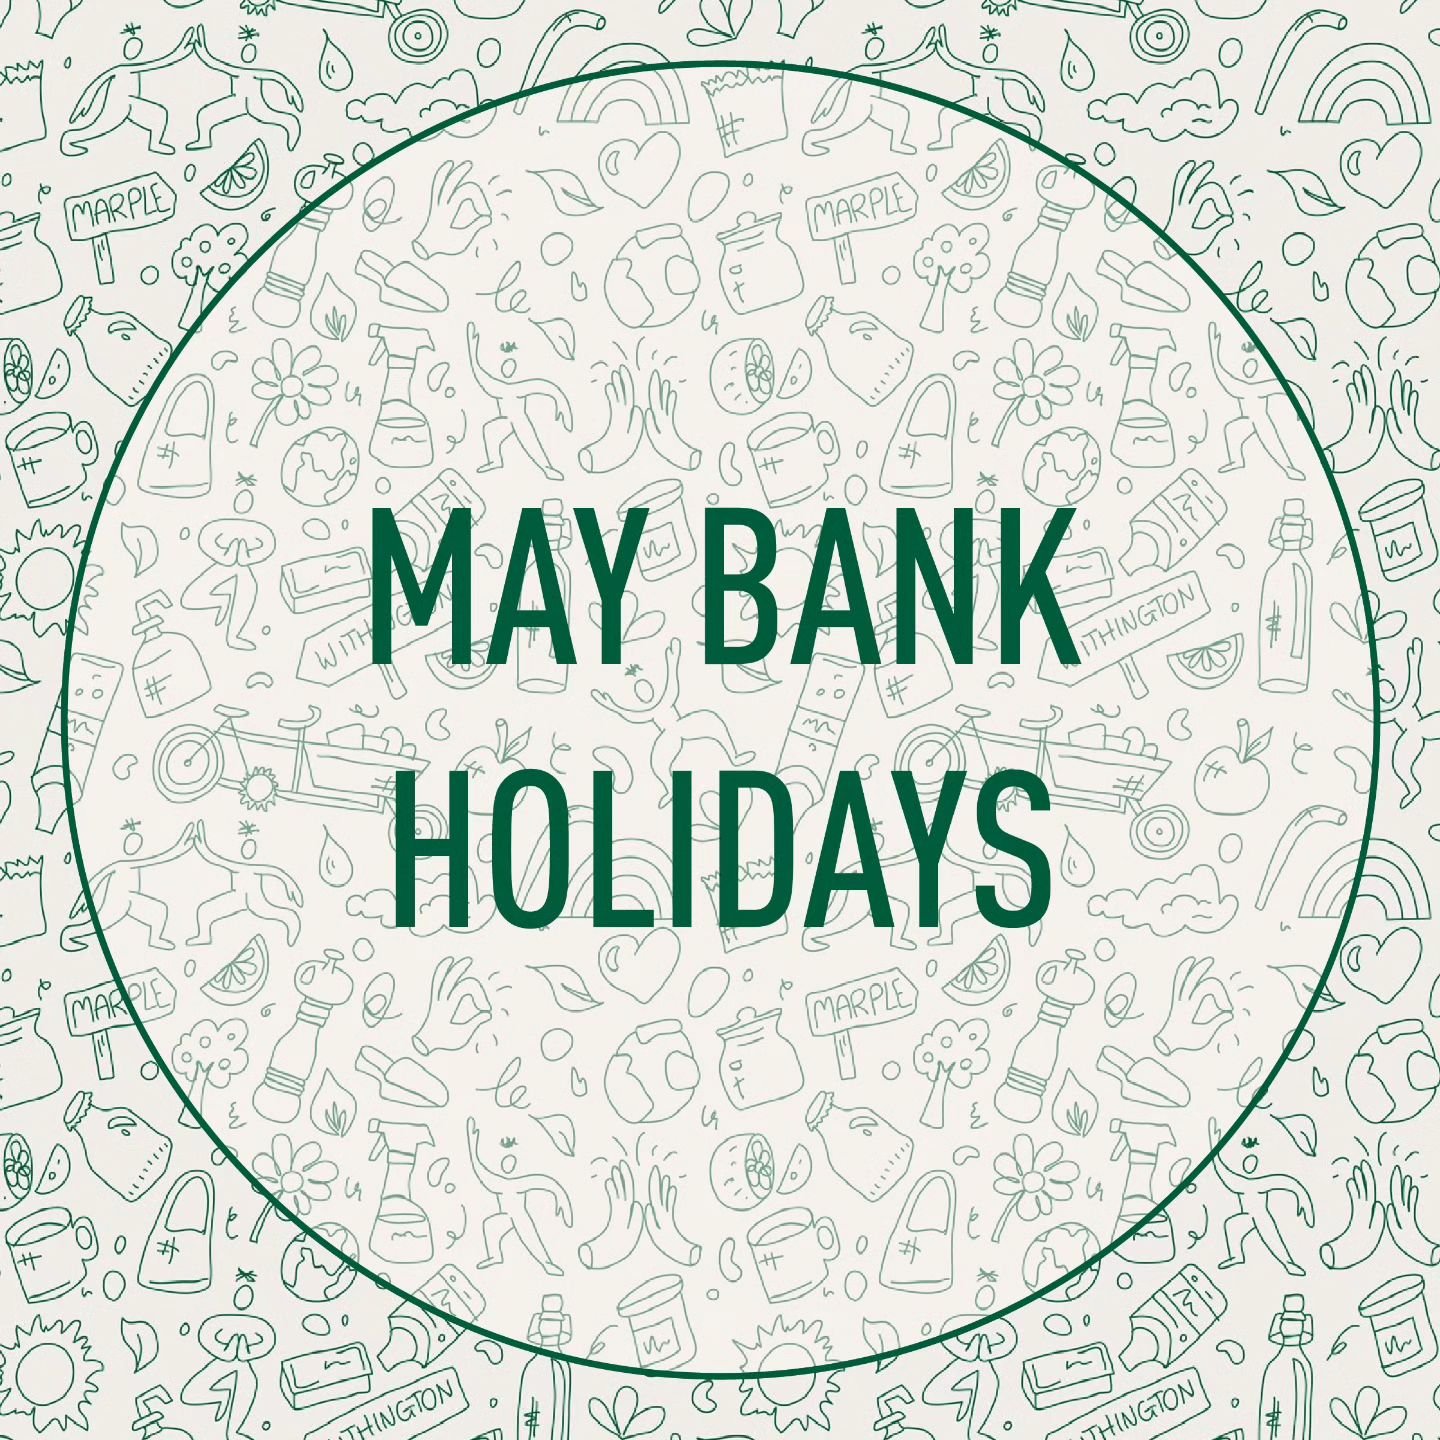 It's May, that means bank holidays!

Both of our shops in #withington and #marple will be closed on Monday 6th and 27th May. 

Shout out to @benjac__ who's produced some new hand drawn designs for us, which you'll start to see around the shops and on